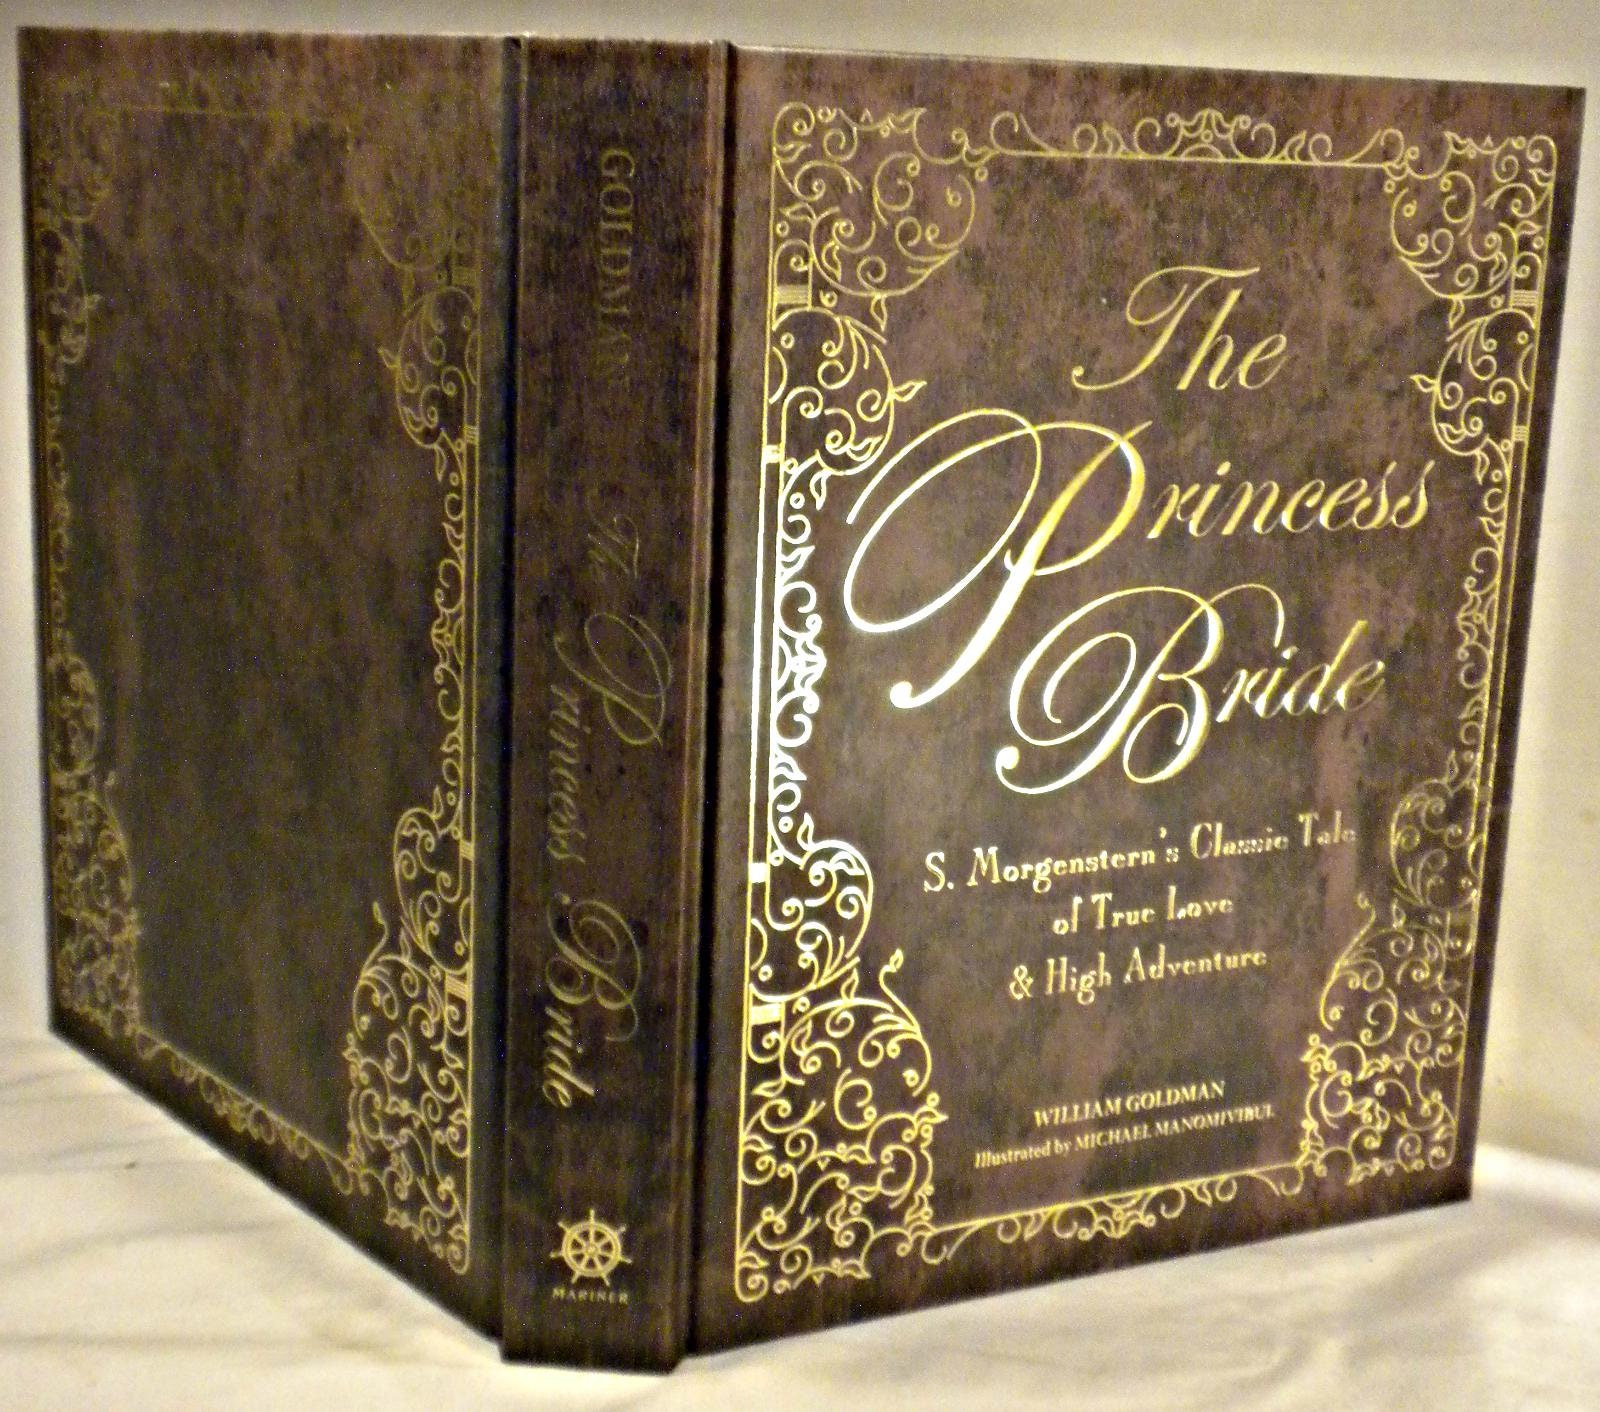 The Princess Bride: An Illustrated Edition of S. Morgenstern's Classic Tale  of True Love and High Adventure